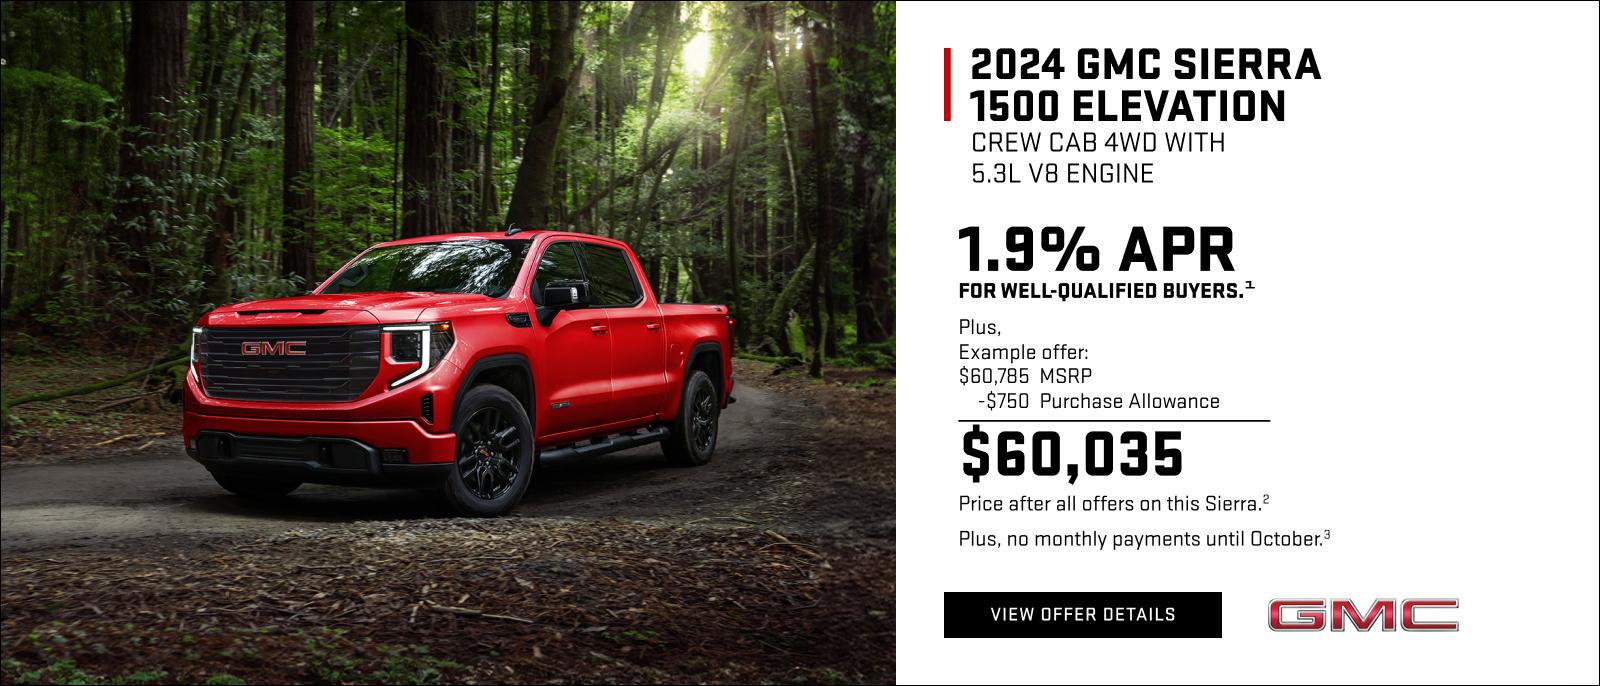 1.9% APR for well-qualified buyers.1

Plus,

Example offer:
$60,785 MSRP
$750 Purchase Allowance
$60,035 Price after all offers on this Sierra.2

Plus, no monthly payments until October.3